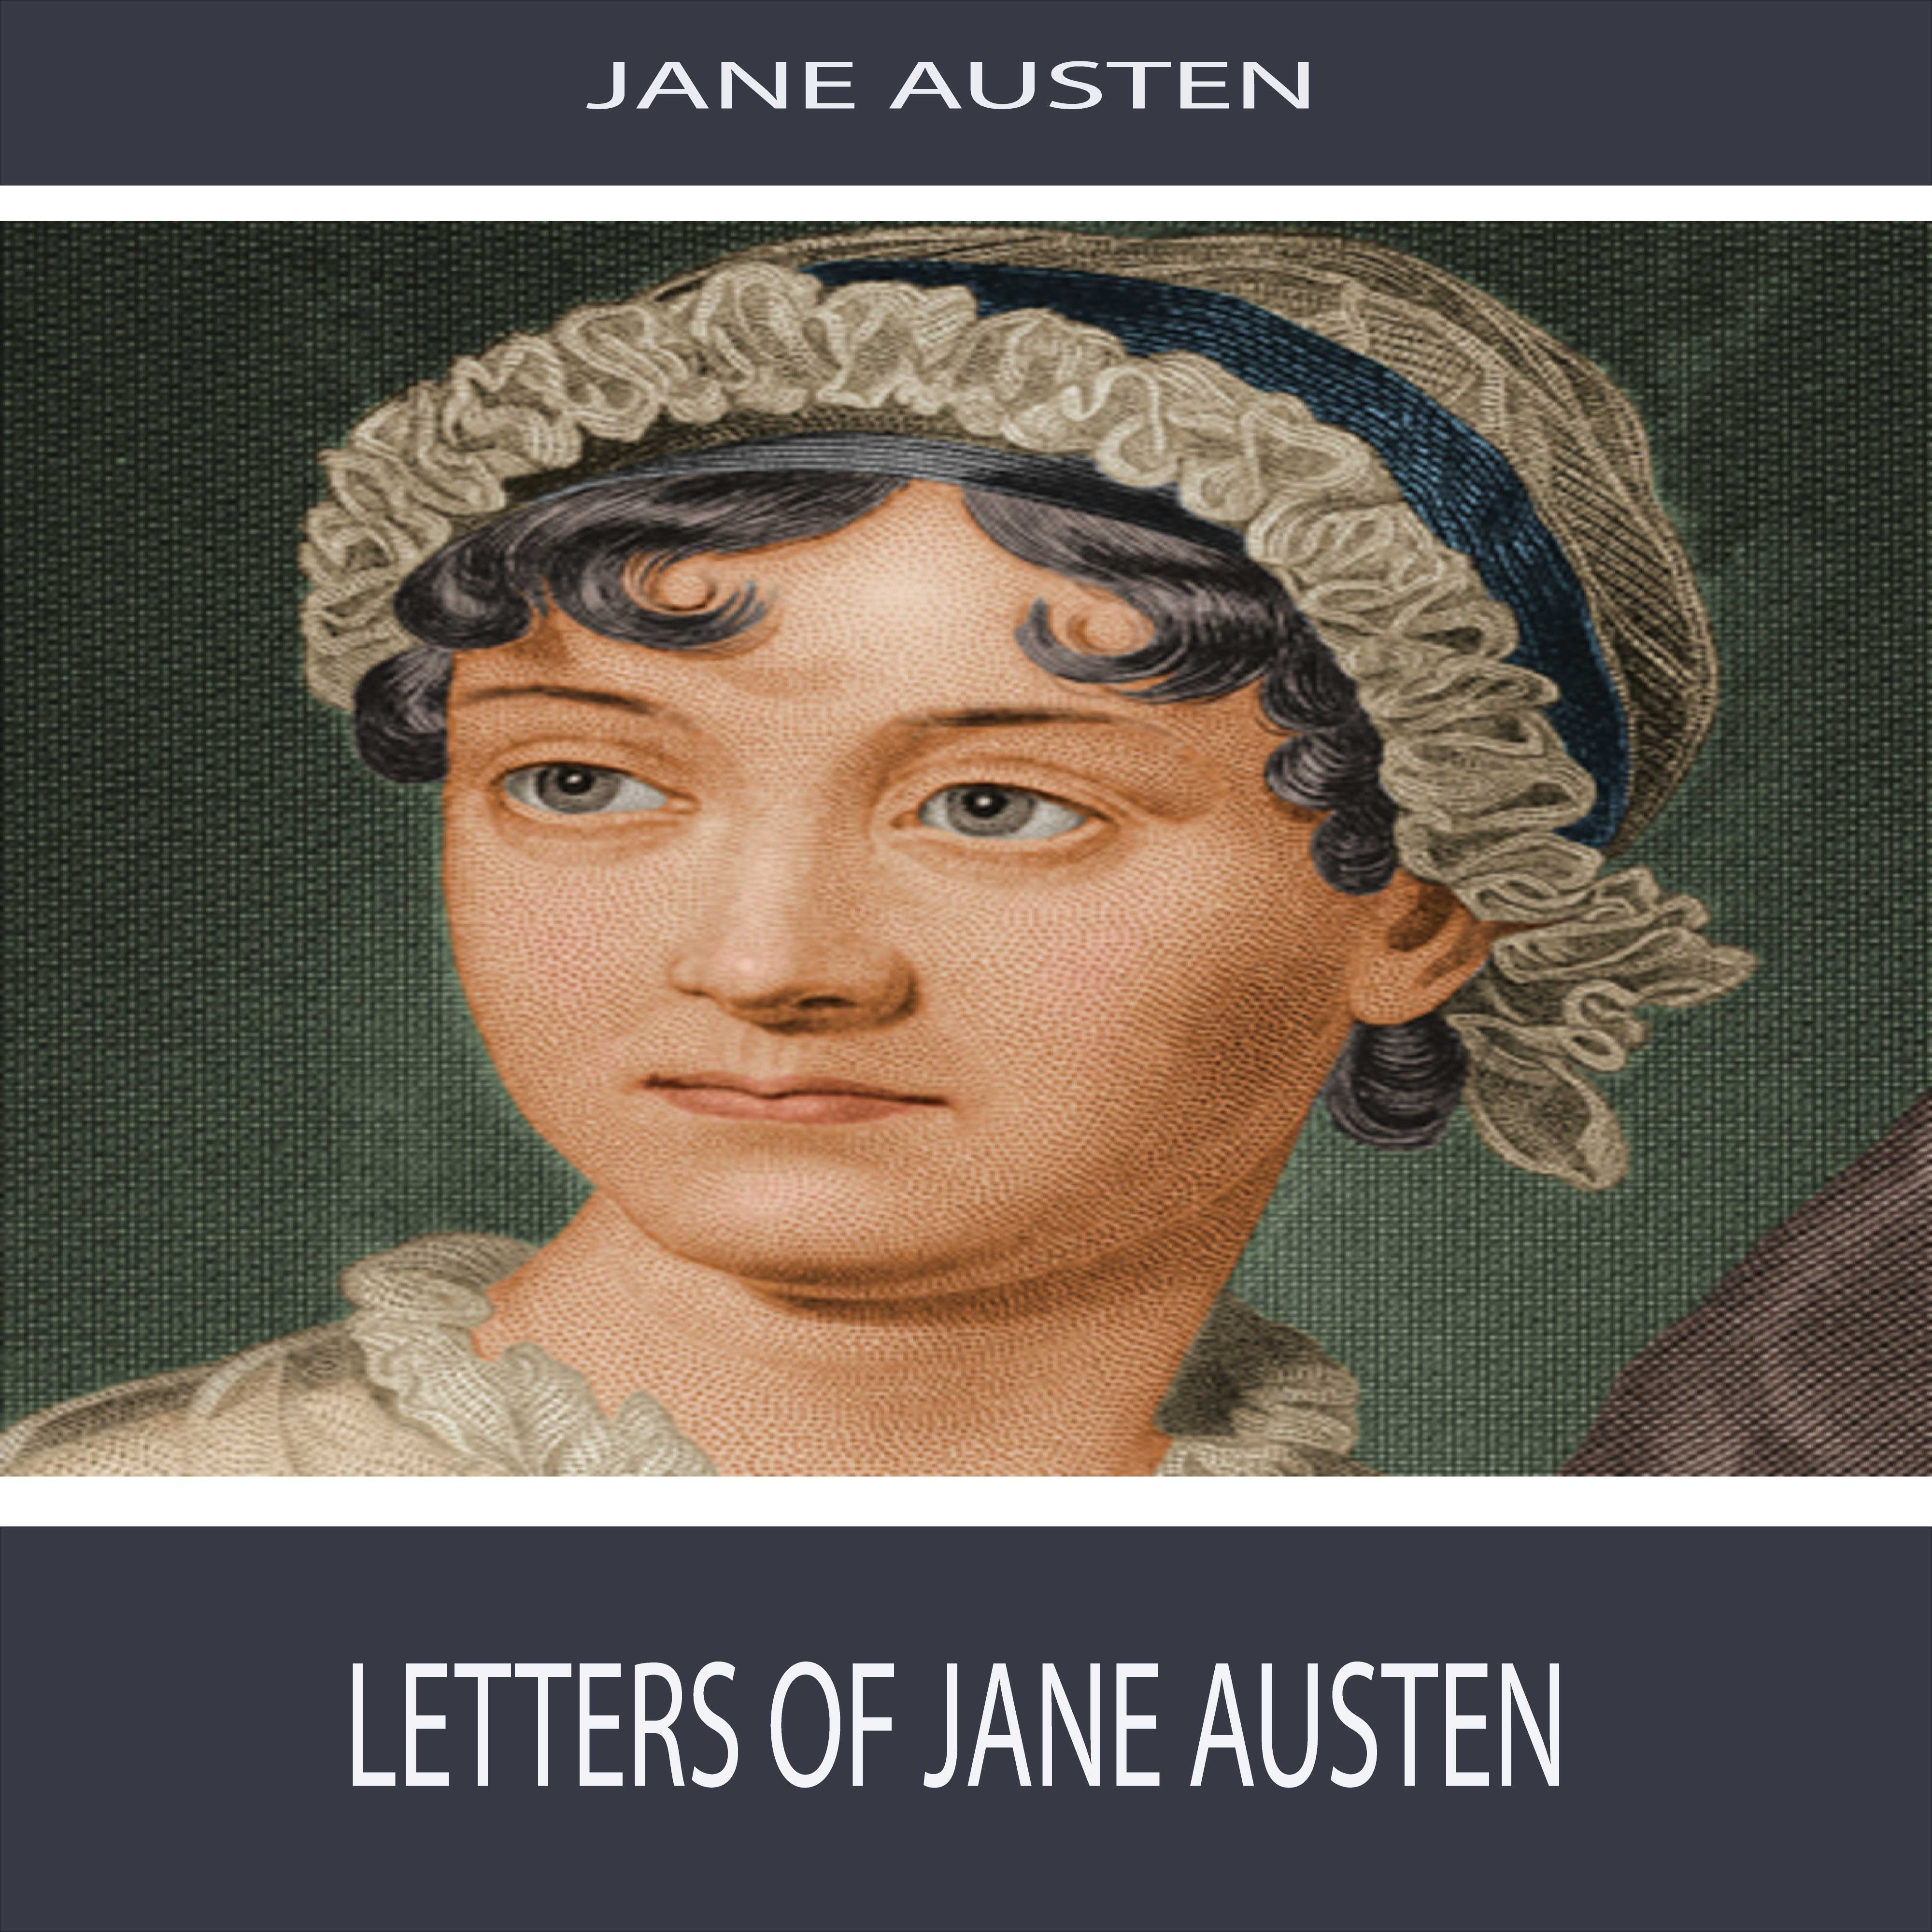 Letters of Jane Austen: Section 20